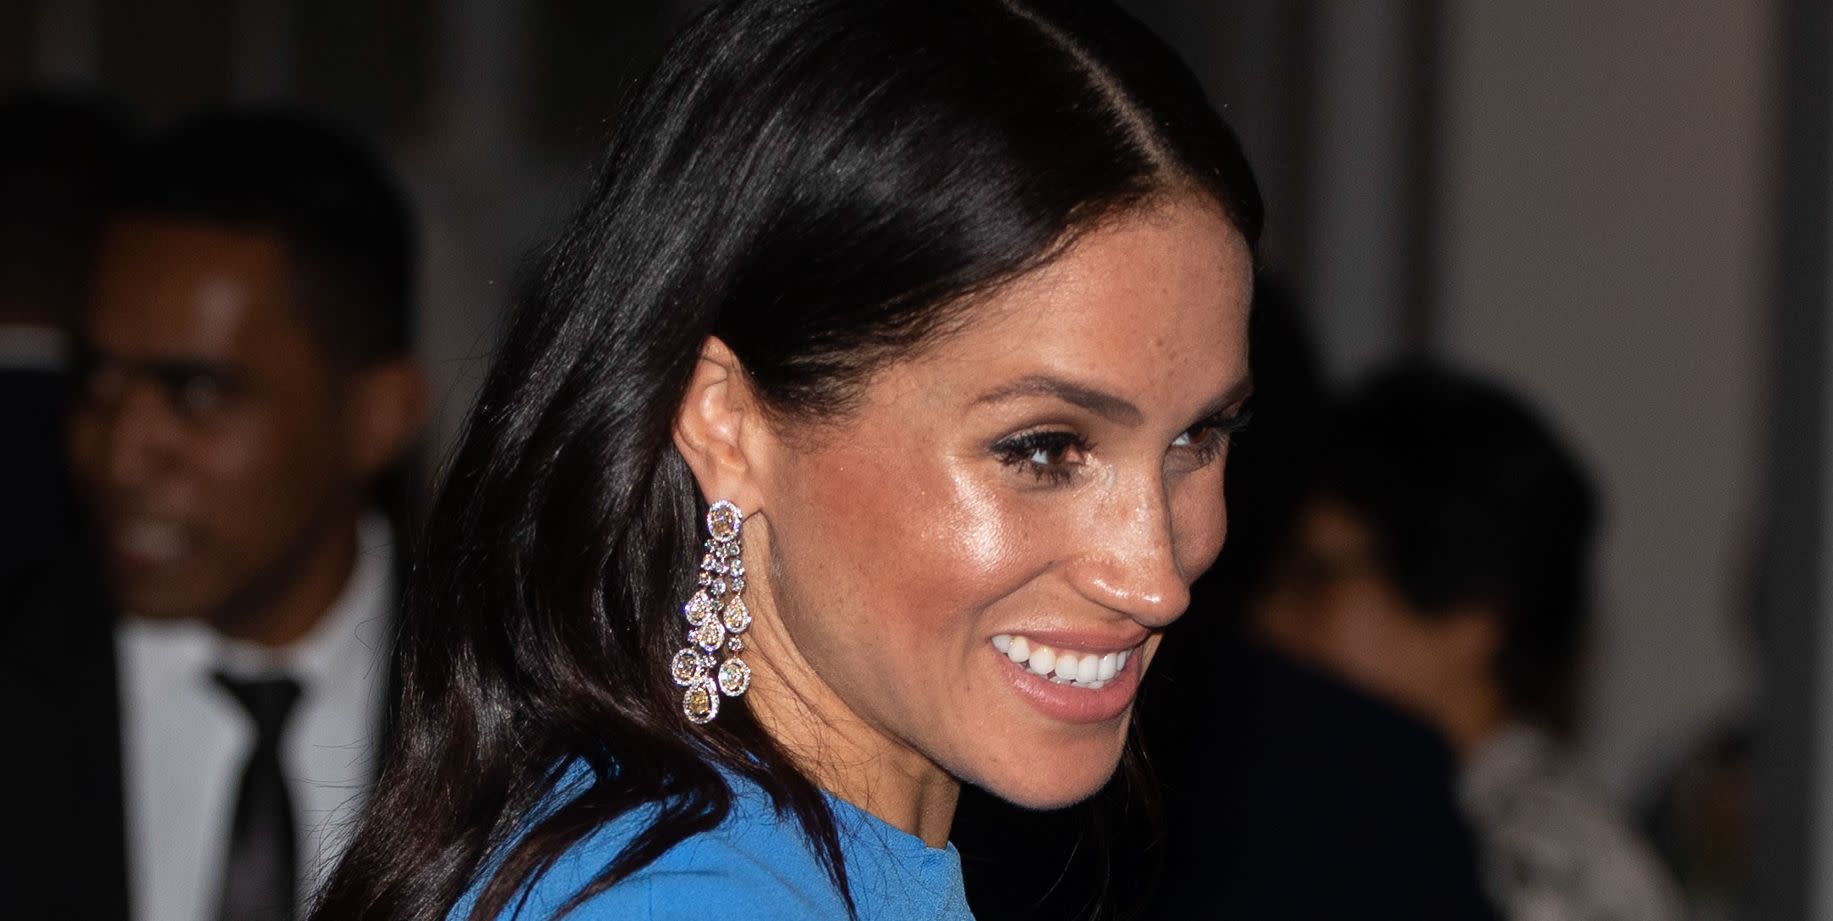 Meghan Markle denies accusations by Bullying Palace employees